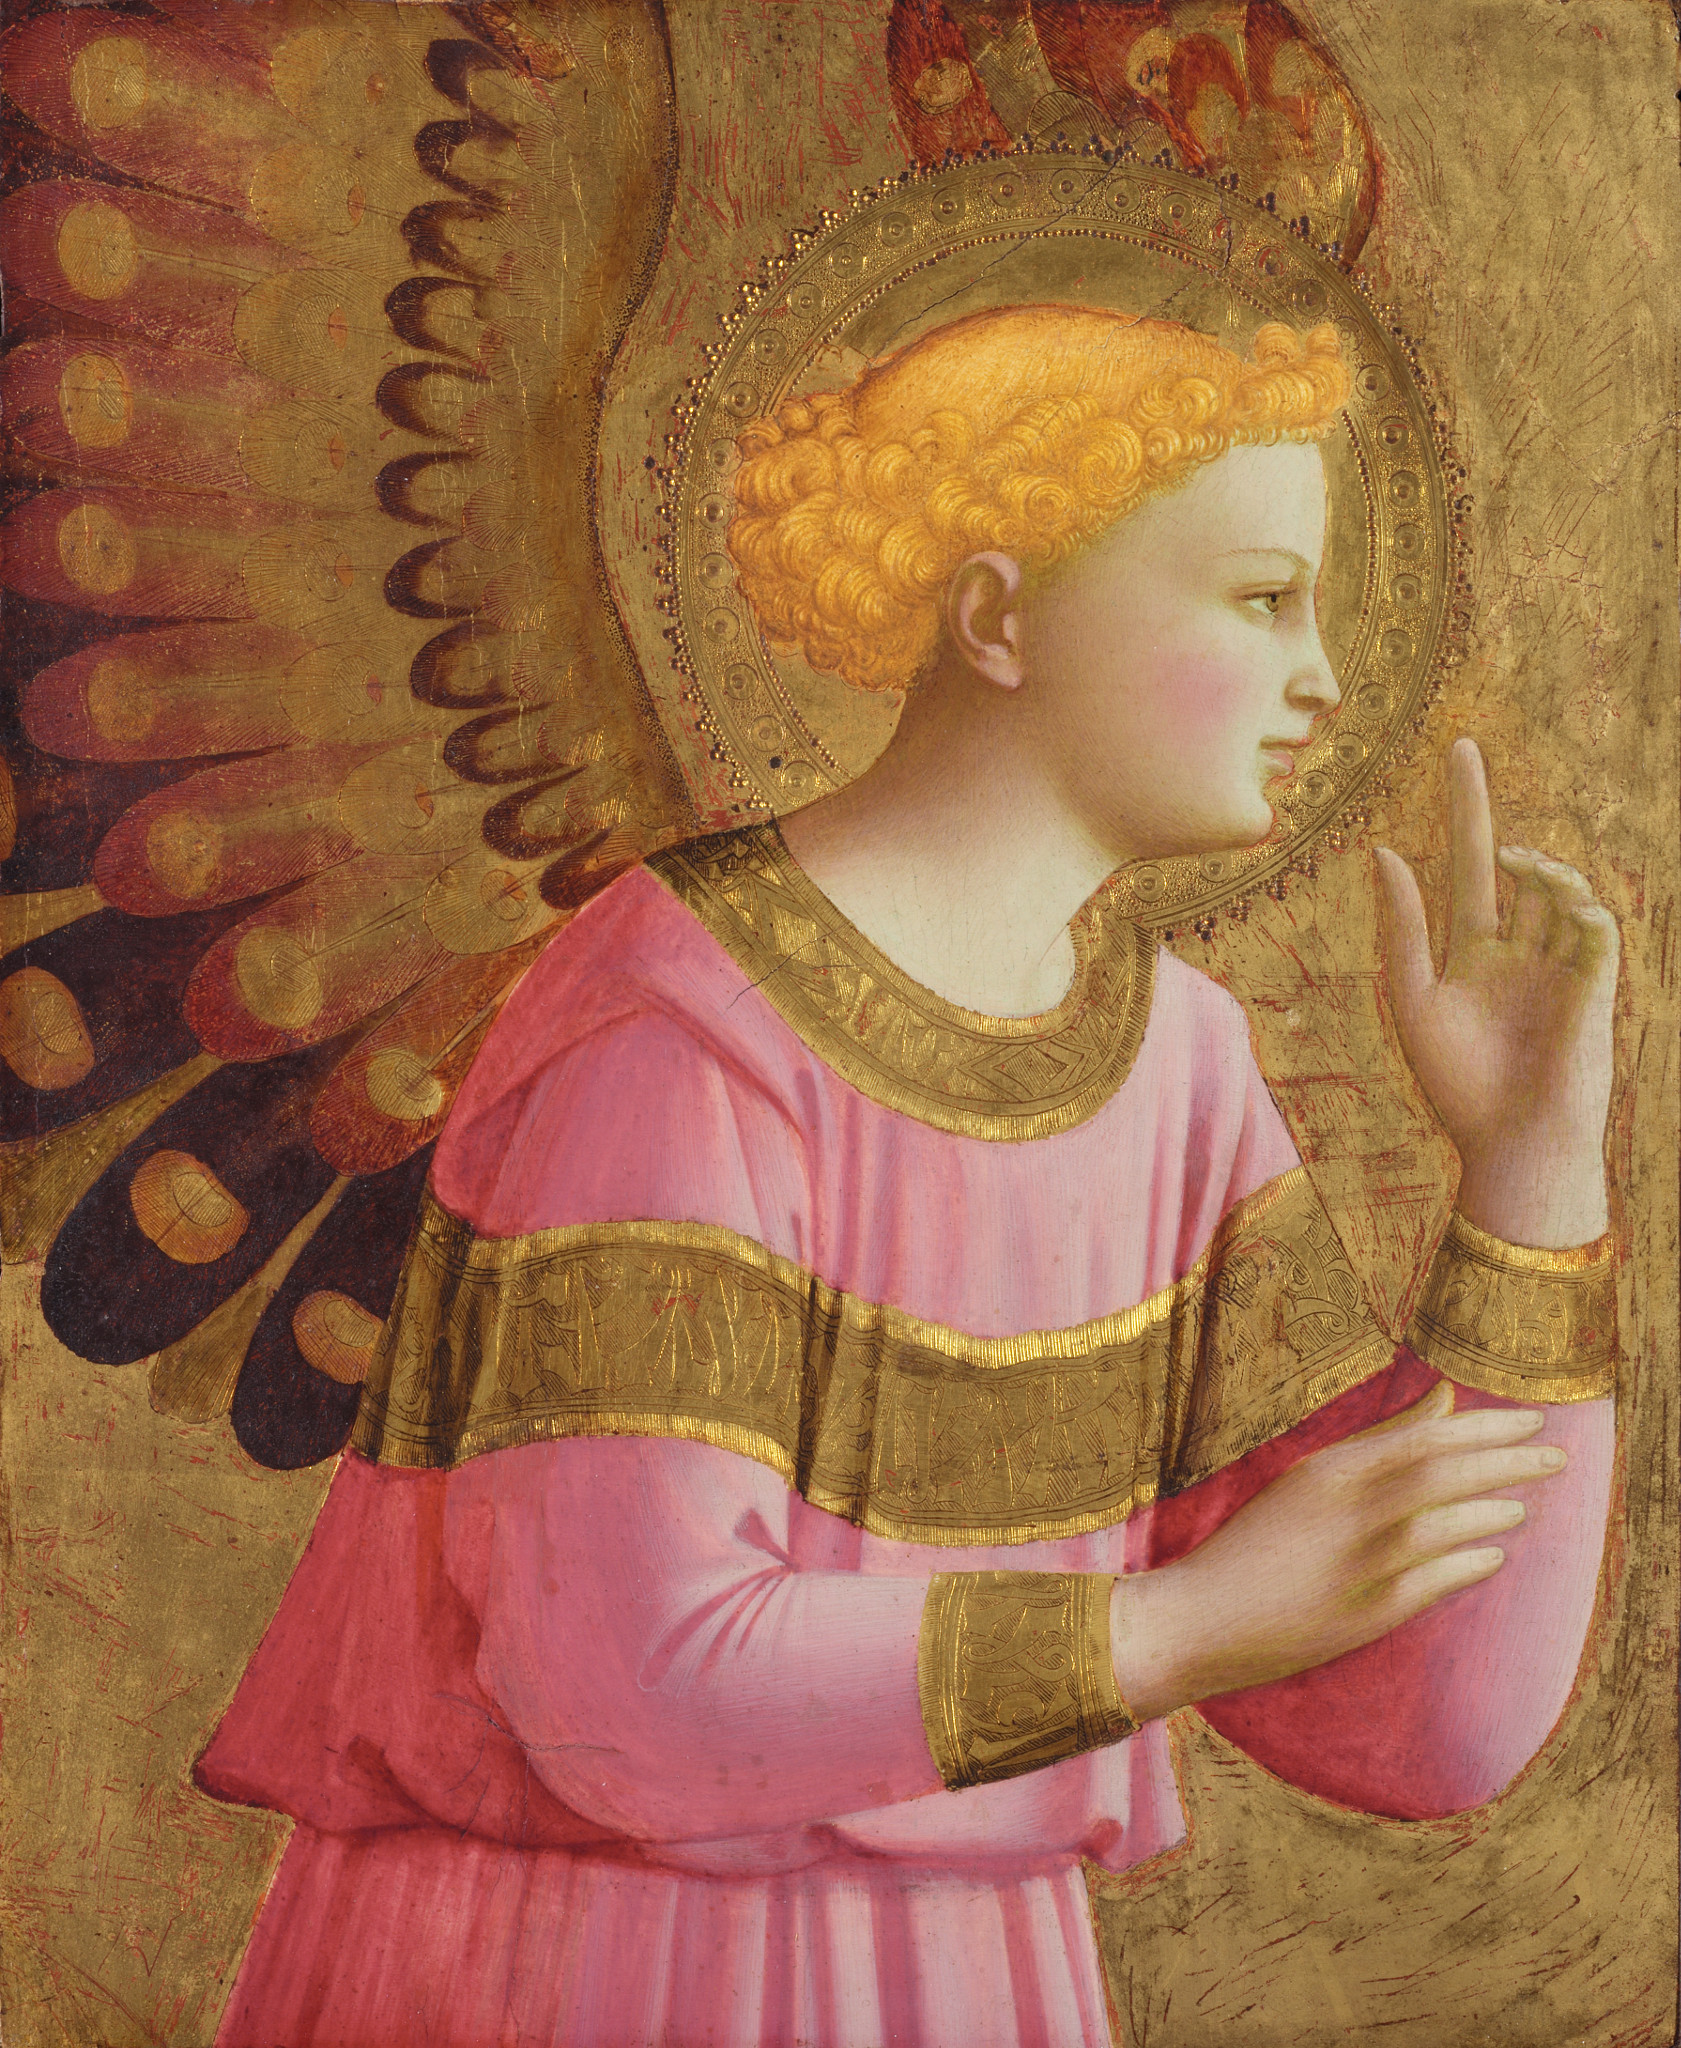 Annunciatory Angel by Fra Angelico - 1450-1455 - 33 x 27 cm Detroit Institute of Arts